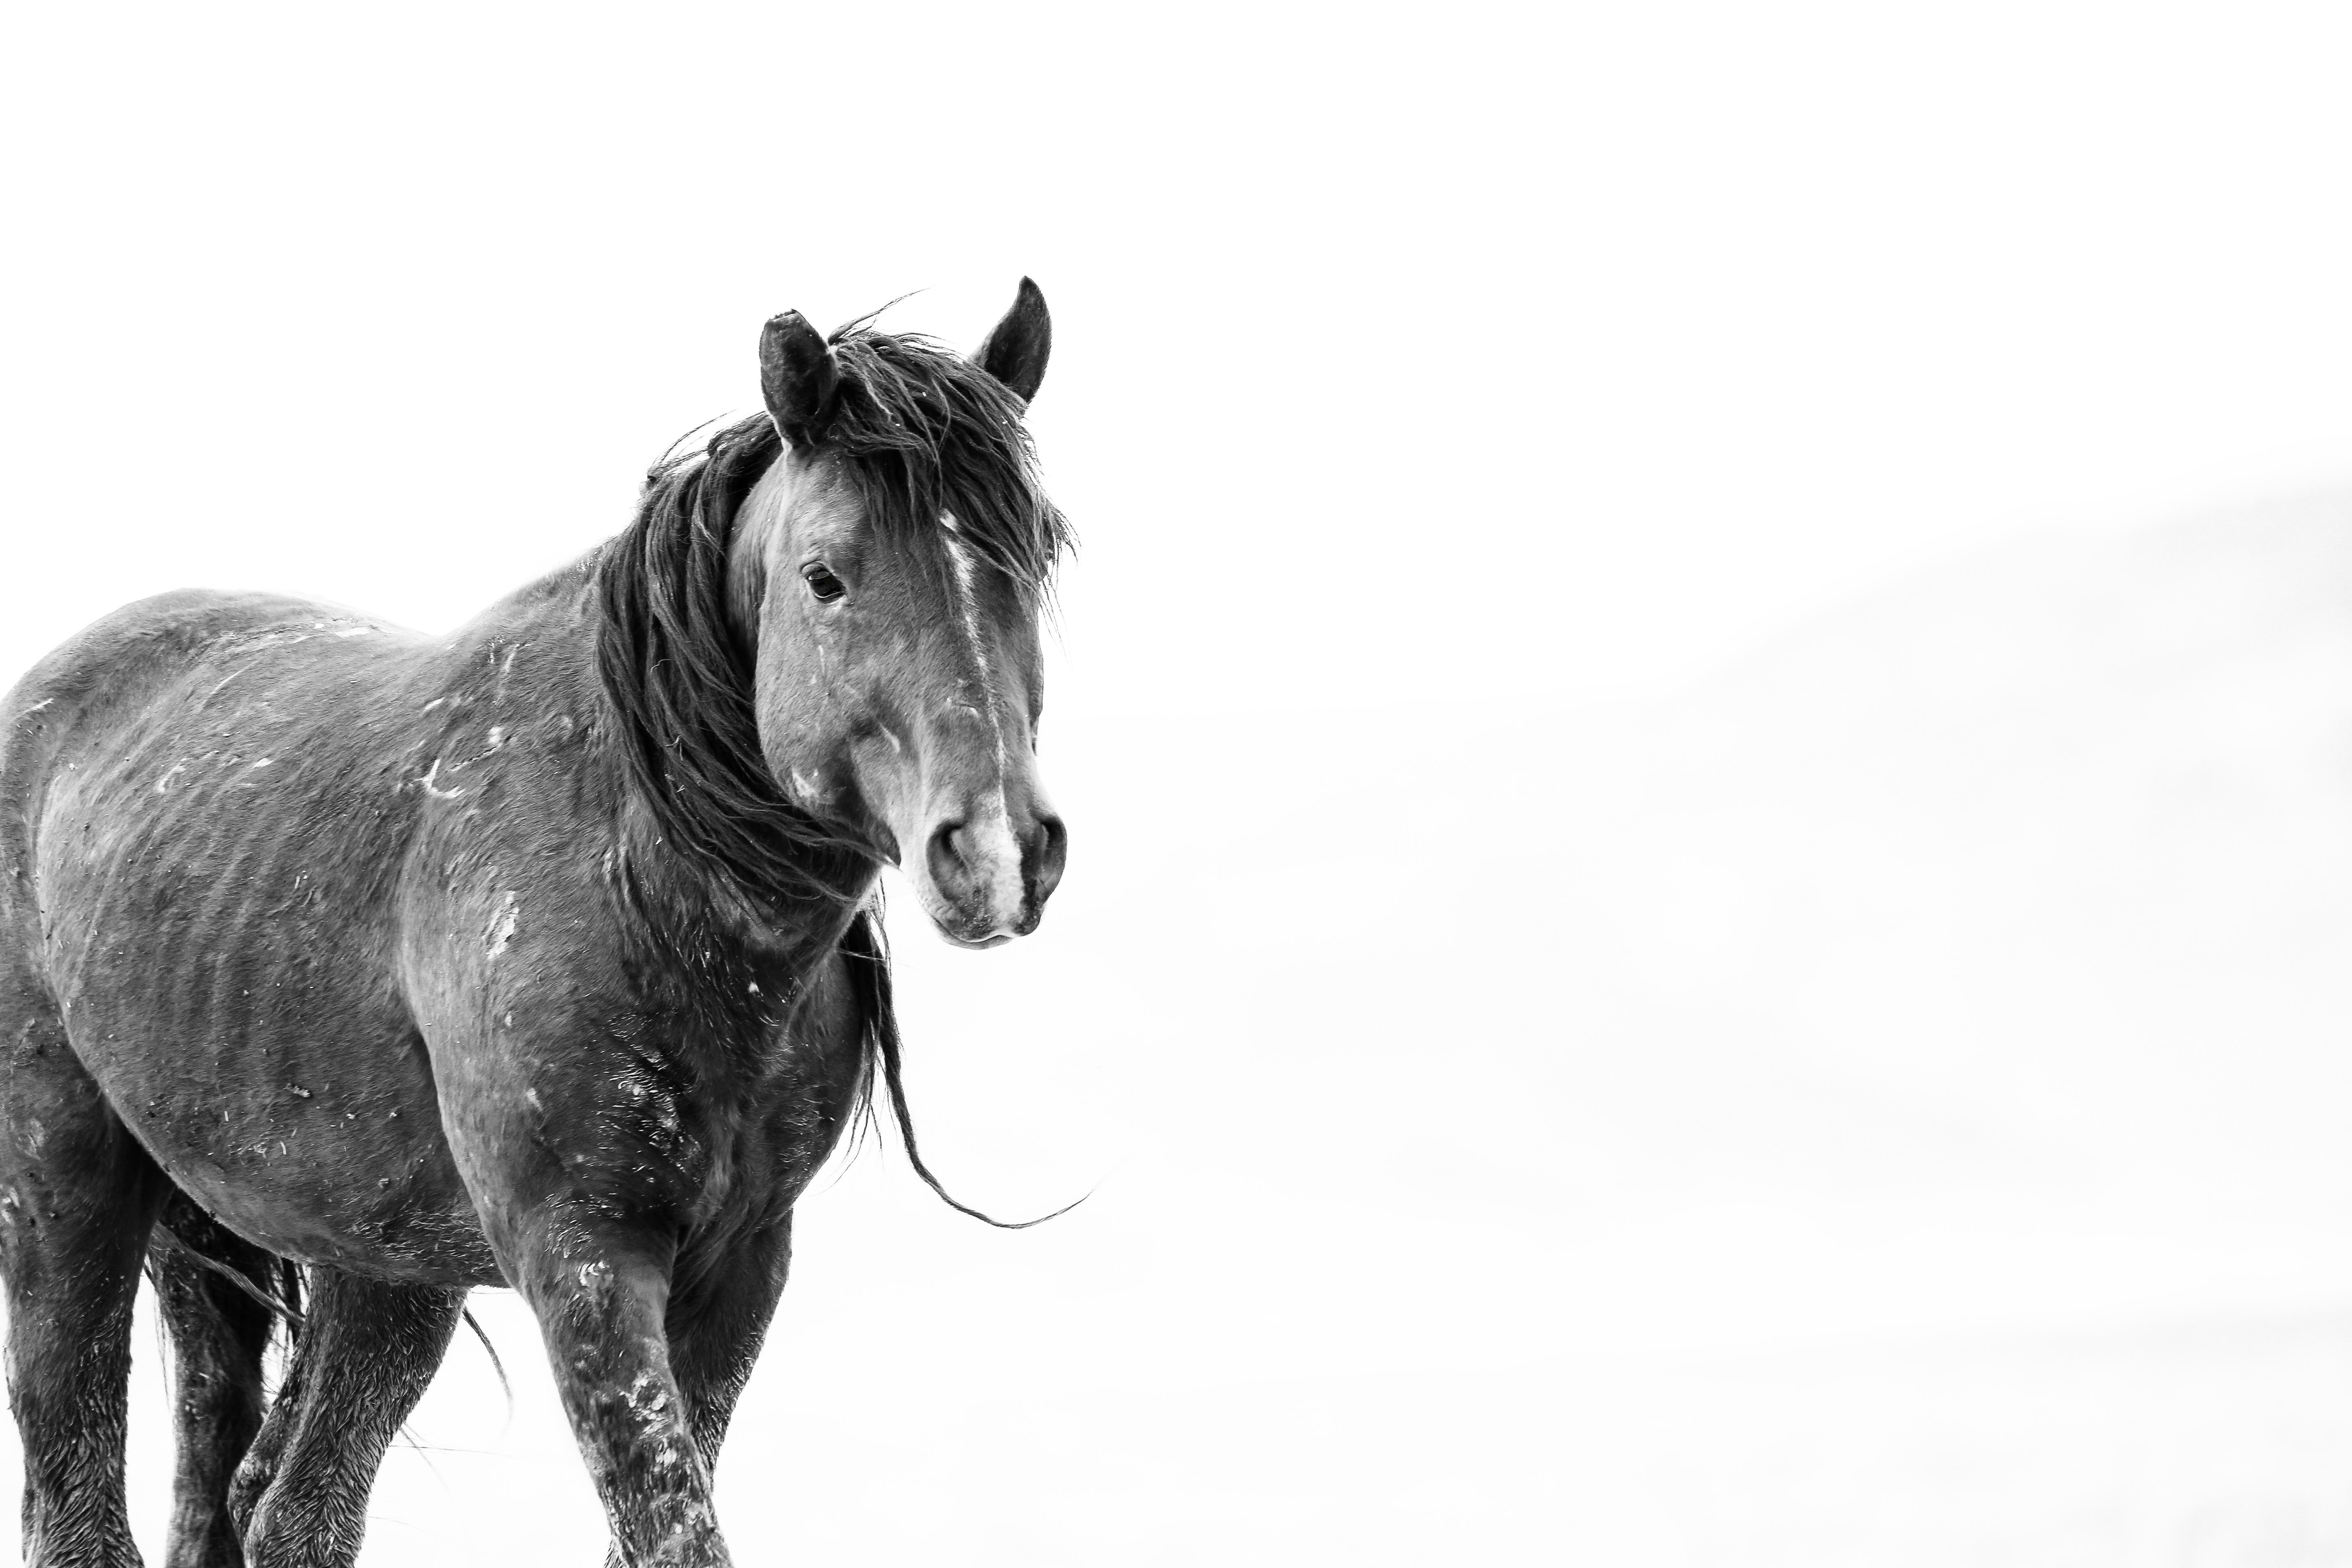 Shane Russeck Animal Print - SOLO 36x48  Black & White Photography, Wild Horses Mustang Photograph ART